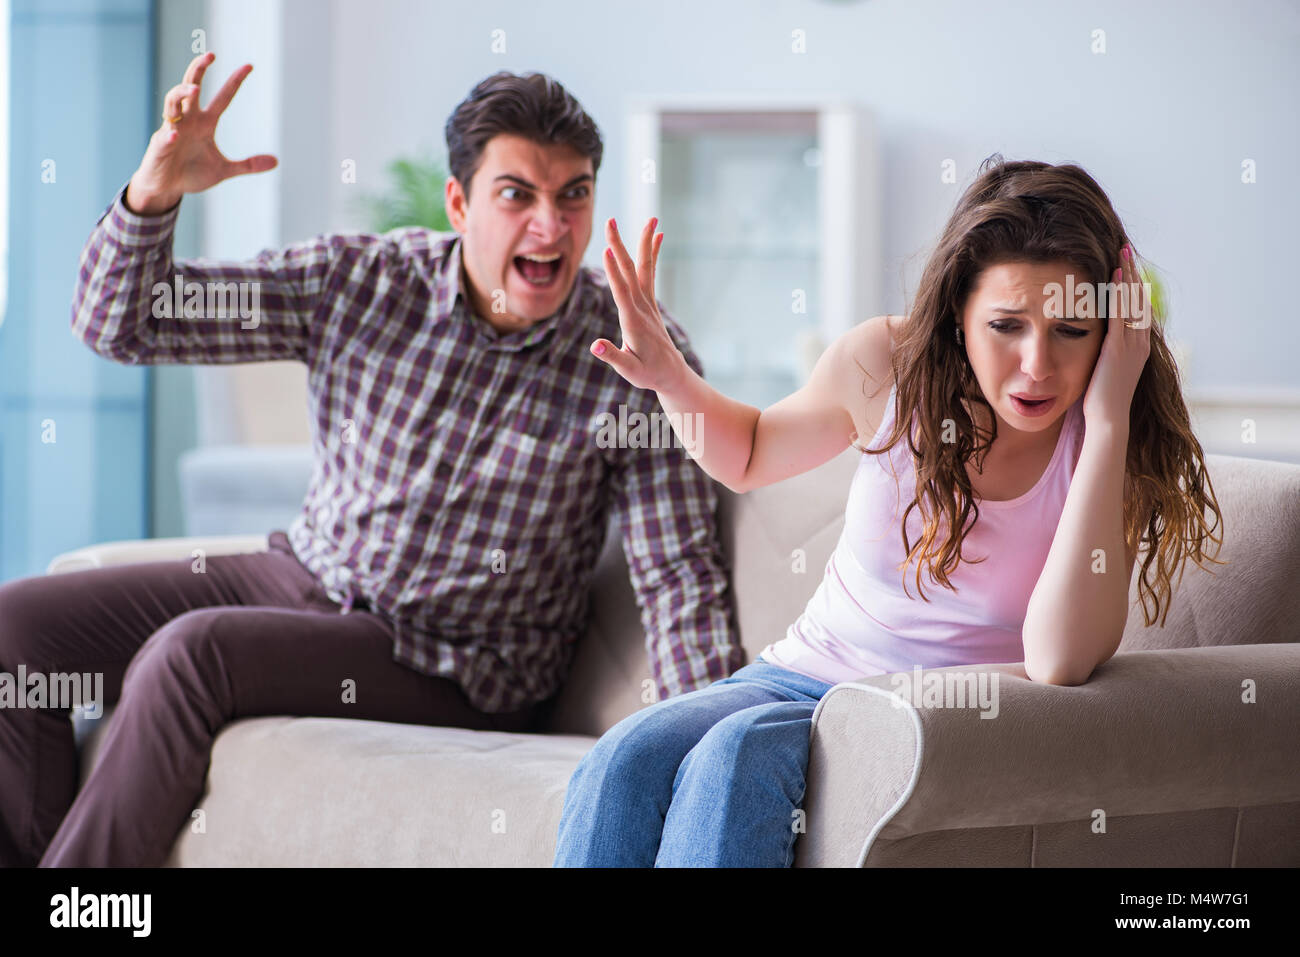 Young family in broken relationship concept Stock Photo